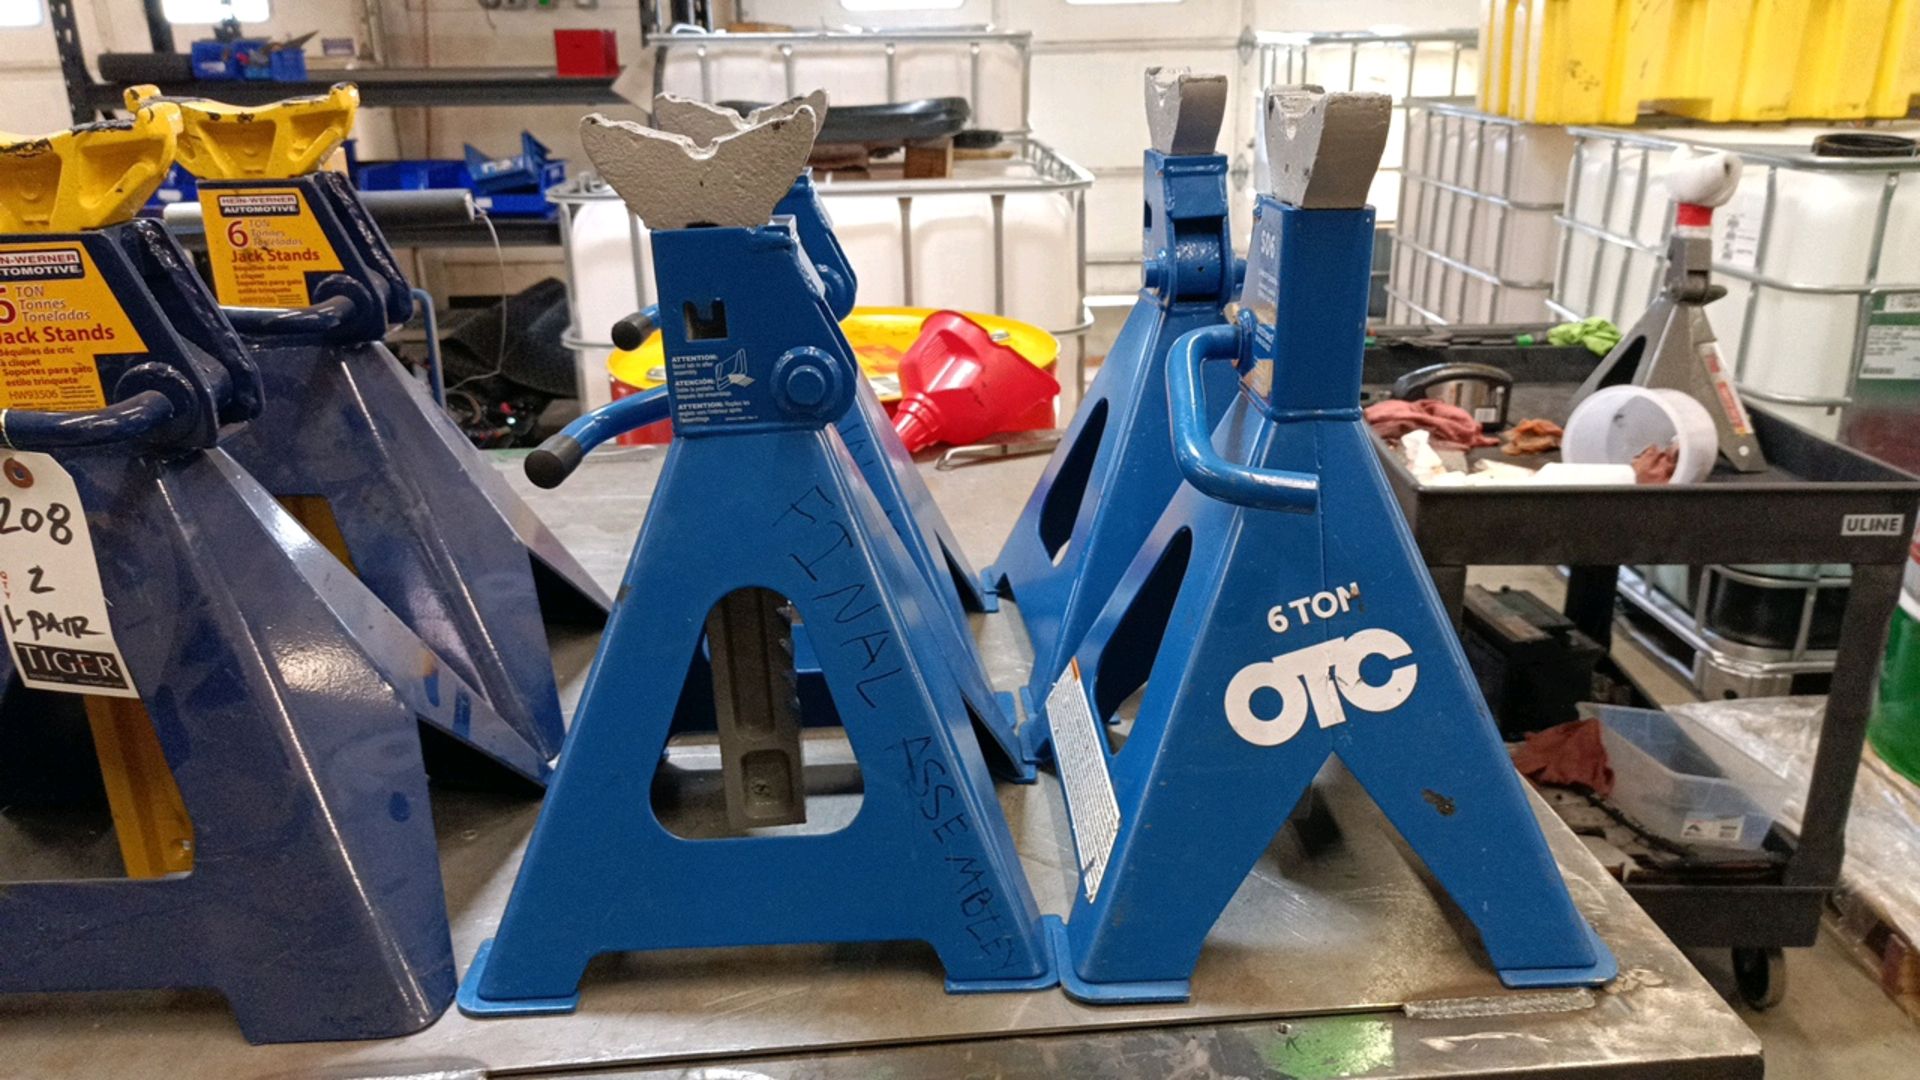 6-Ton Jack Stands - Image 2 of 4